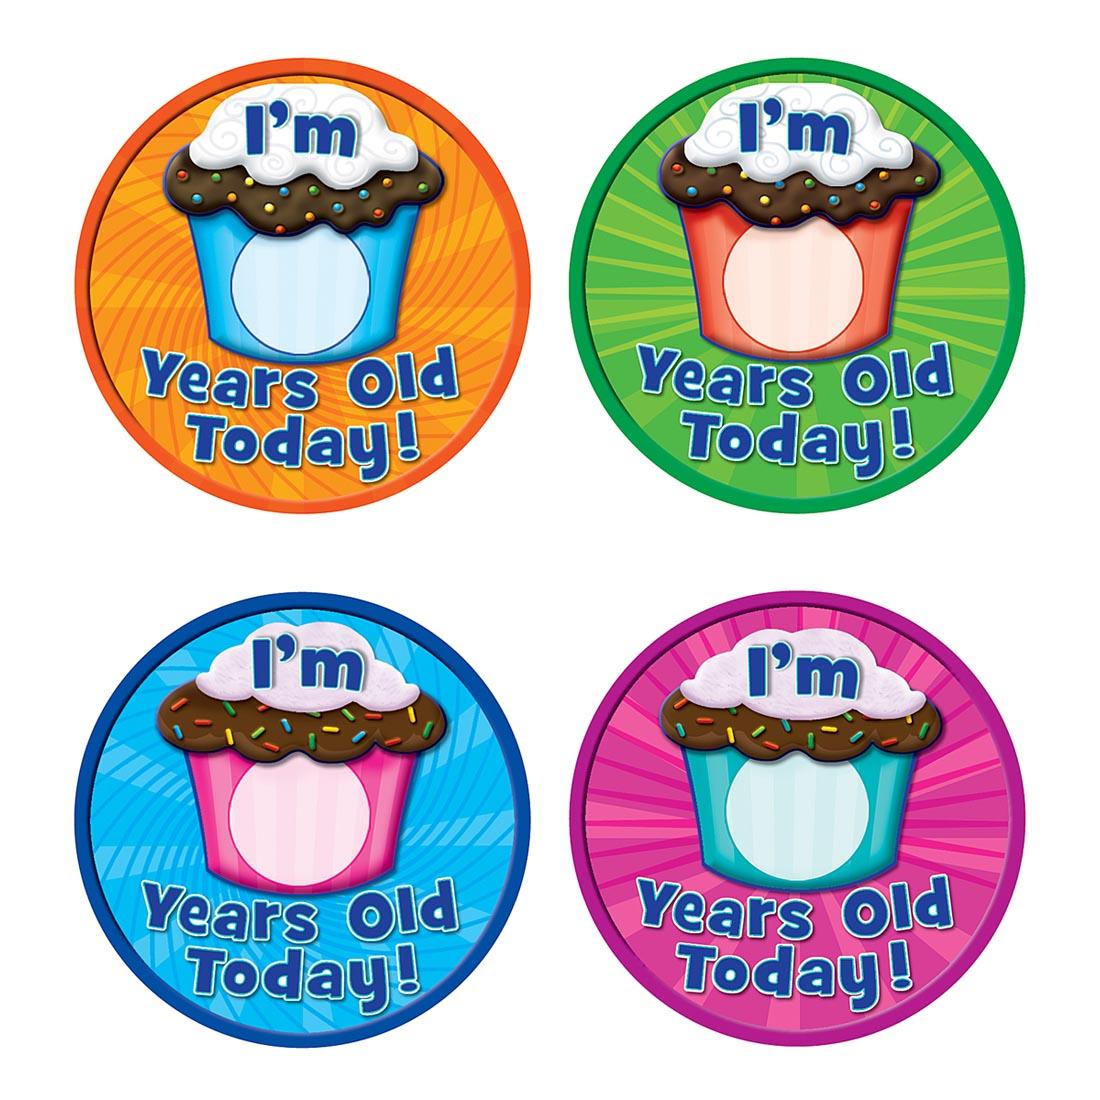 I'm Blank Years Old Today Wear 'Em Badges